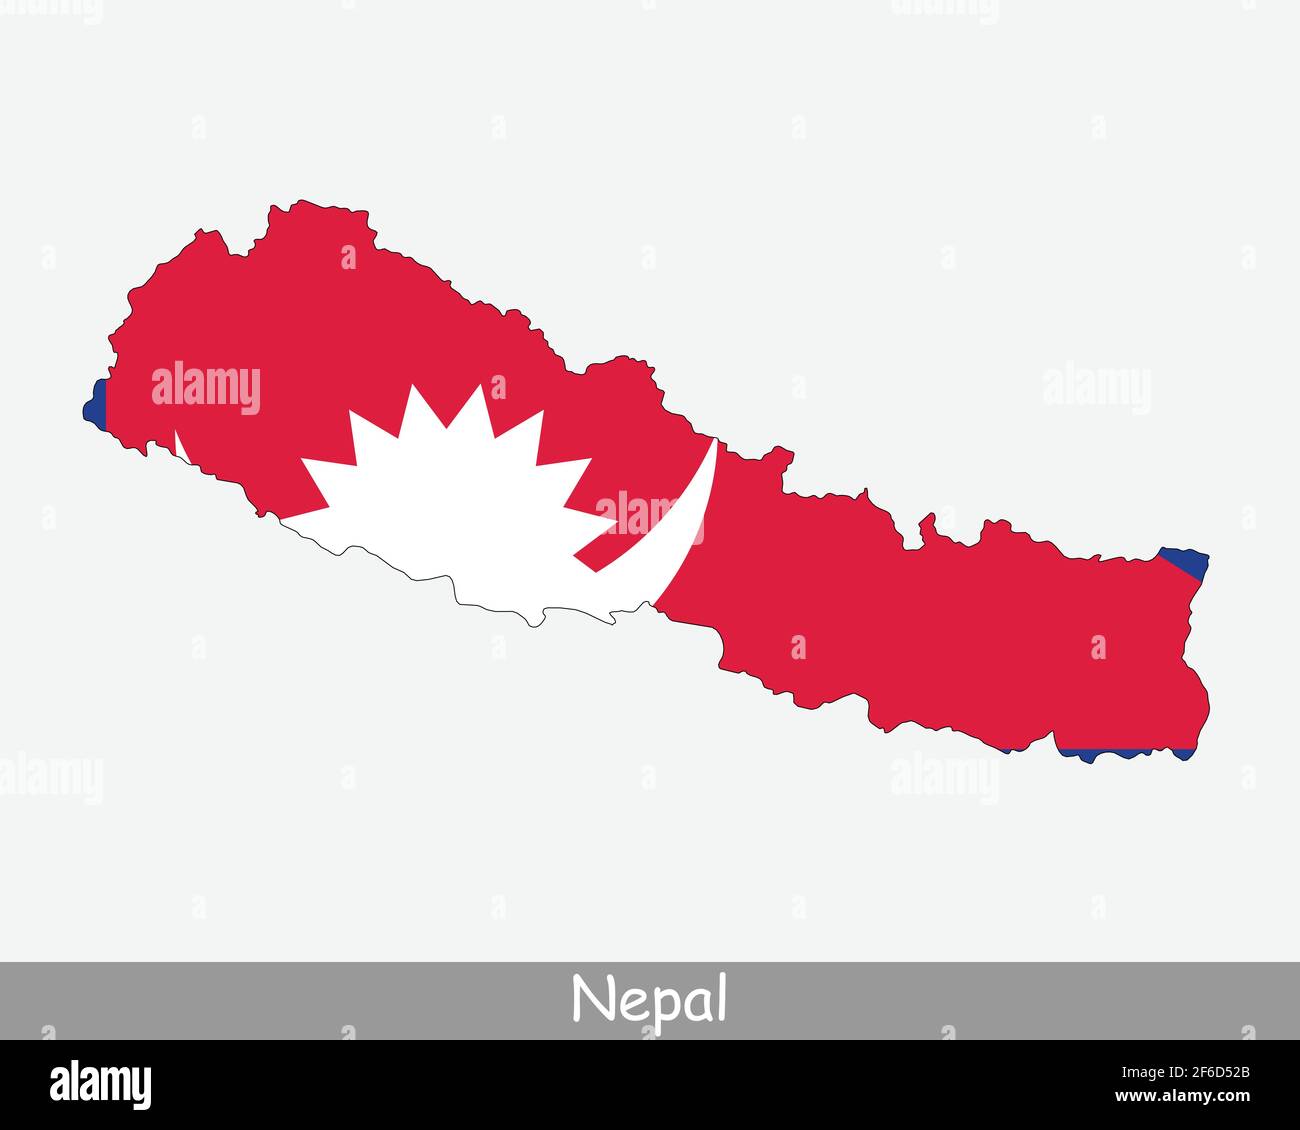 Nepal Flag Map. Map of the Federal Democratic Republic of Nepal with the Nepalese national flag isolated on white background. Vector Illustration. Stock Vector